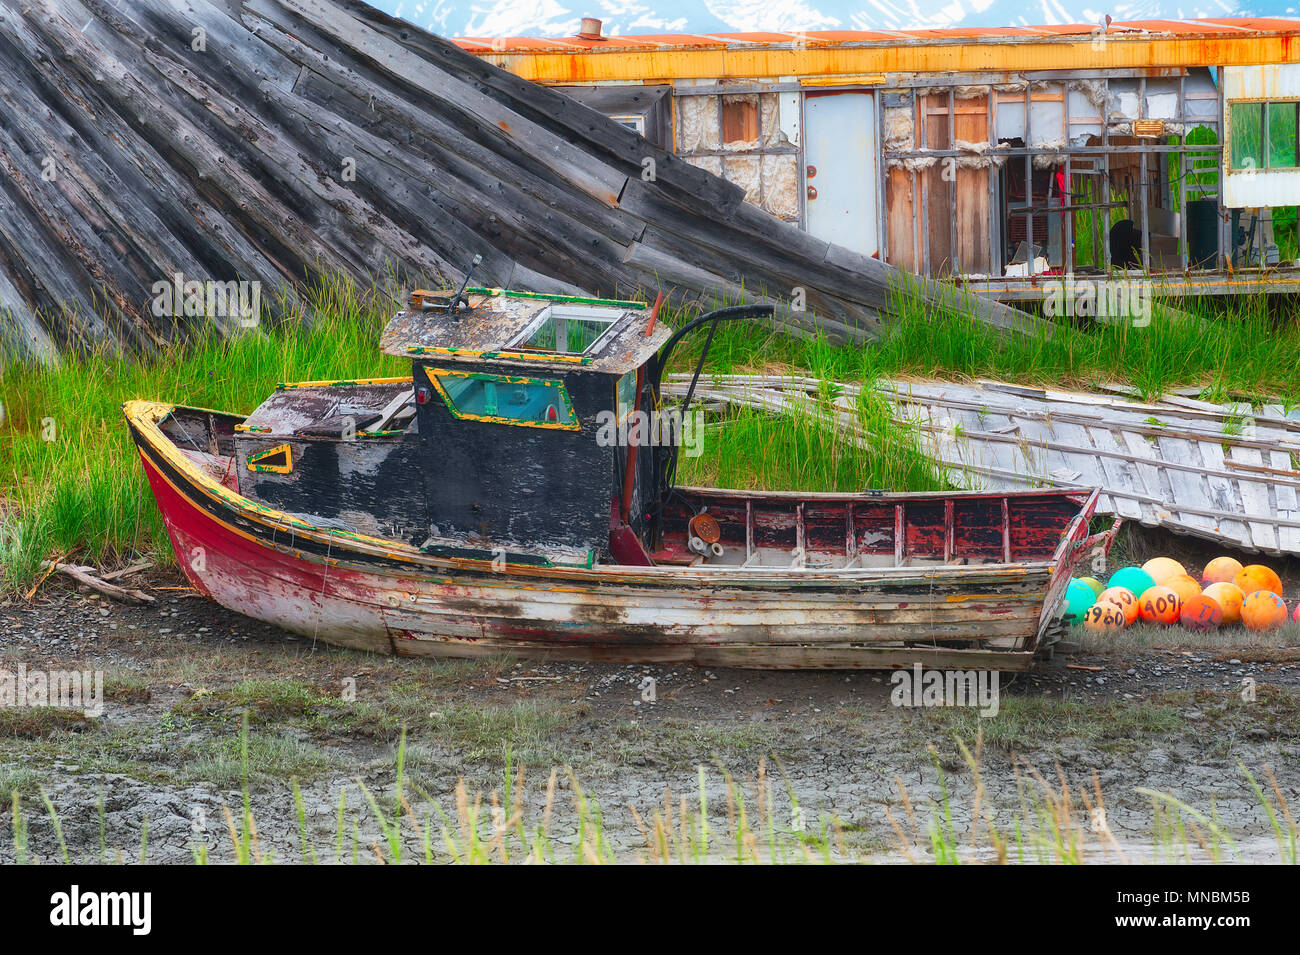 A rotting abandoned boat sits in a muddy grassy field among other decaying junk seen from the walking path along Kachemak Bay in Homer Alaska. Stock Photo